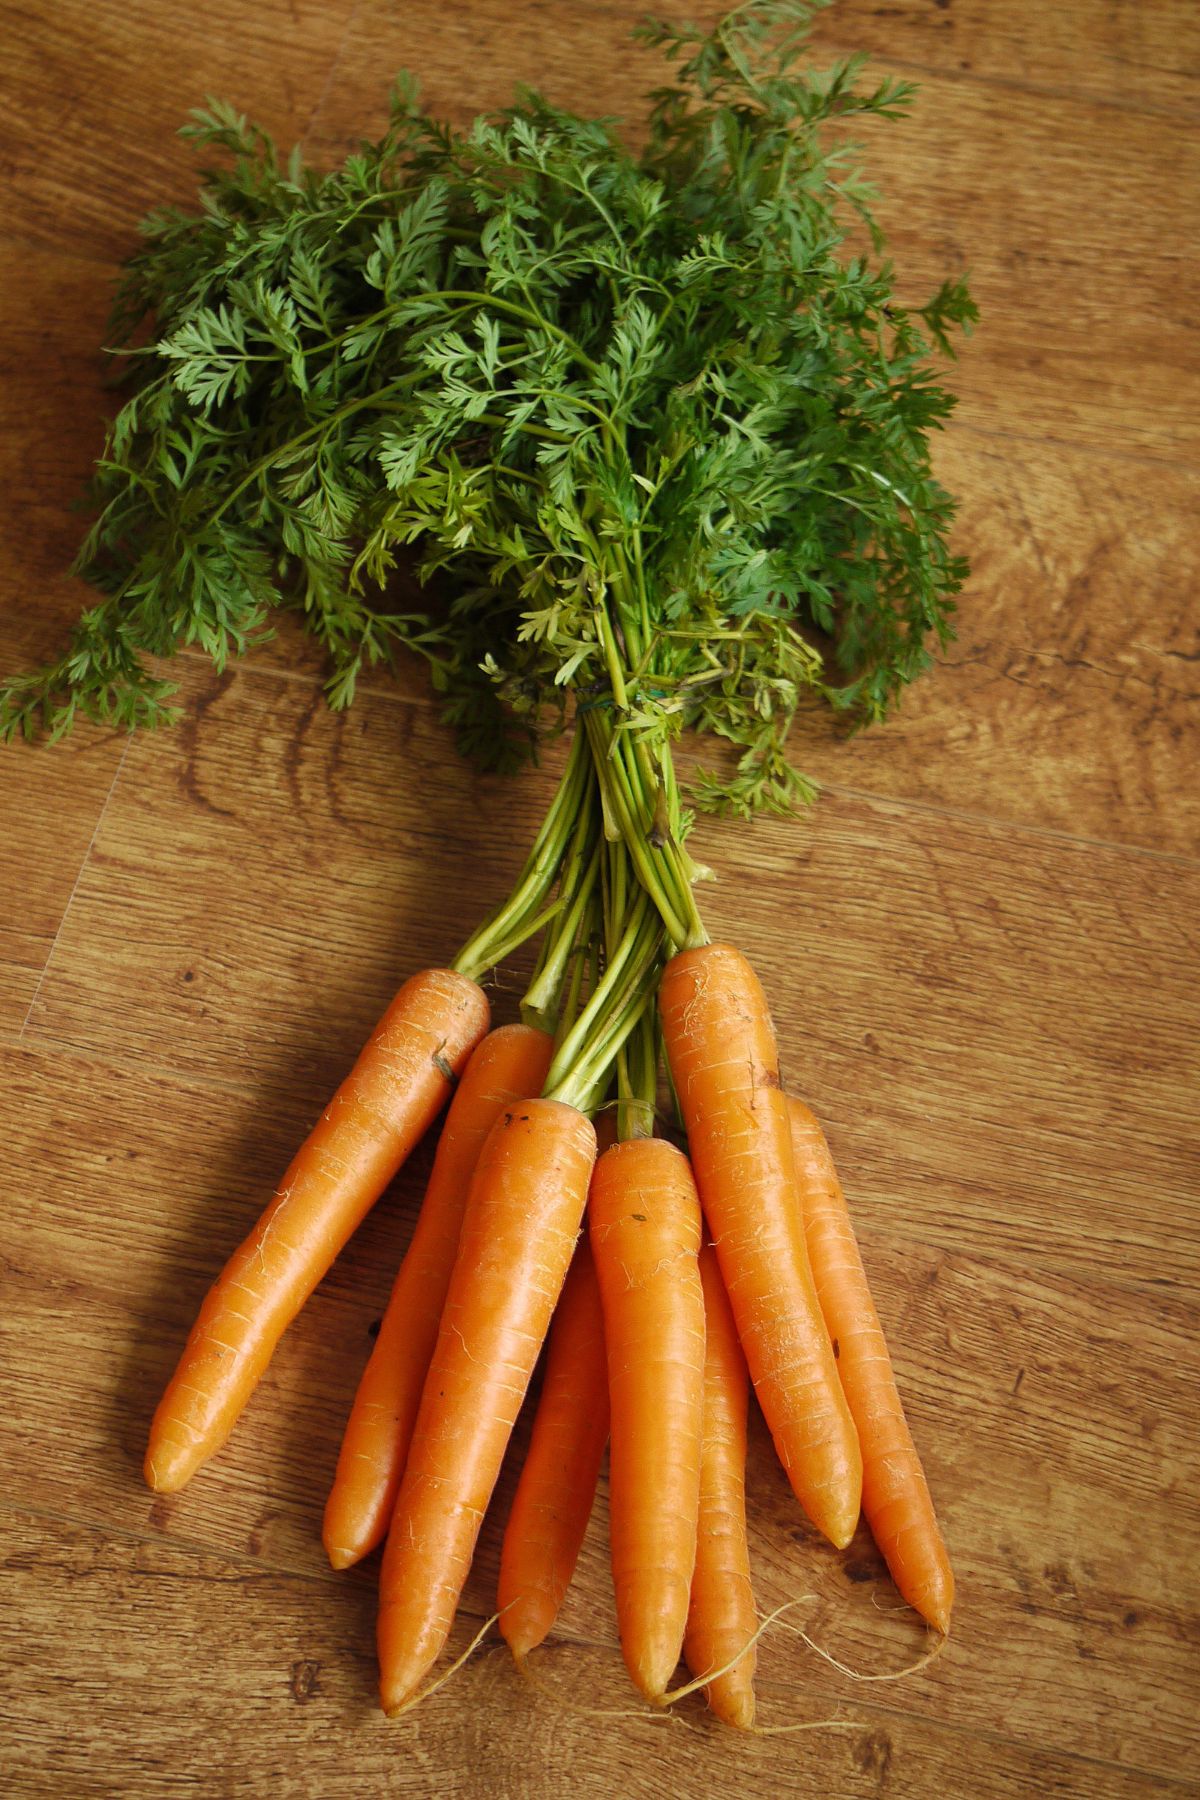 A bunch of carrots with greens on a wooden counter.